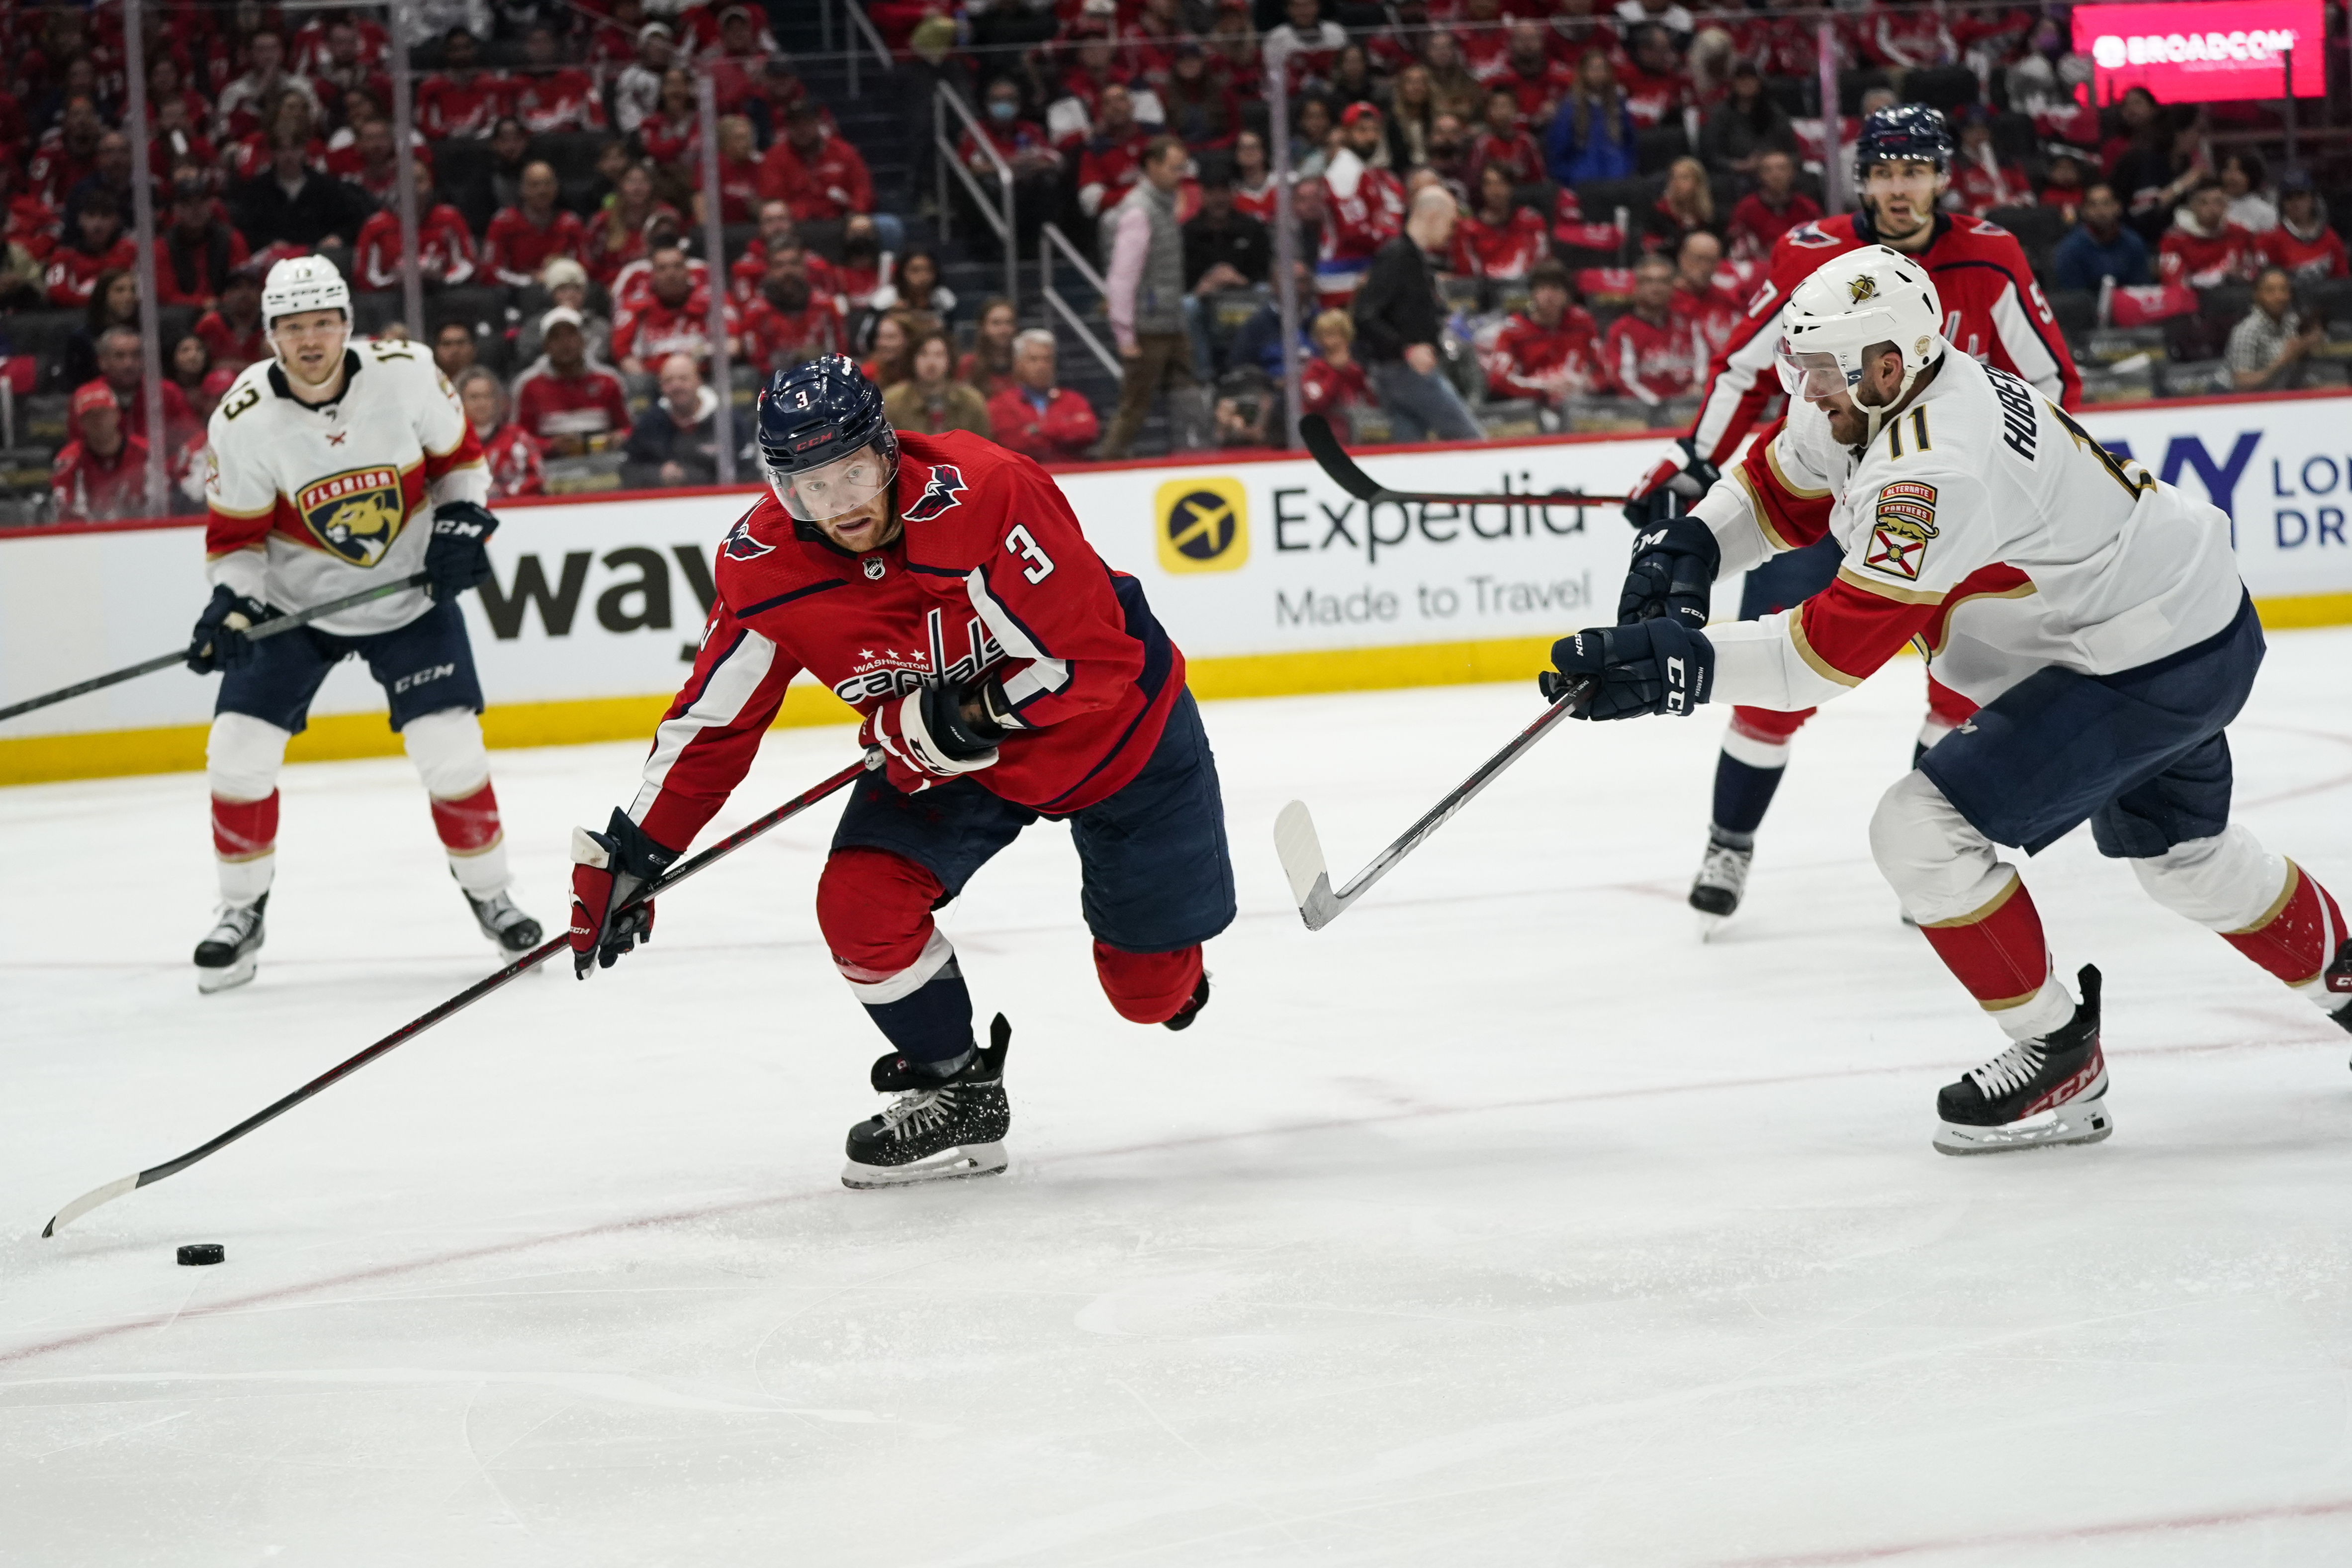 Capitals Beat Panthers 6-1, Lead Series 2-1